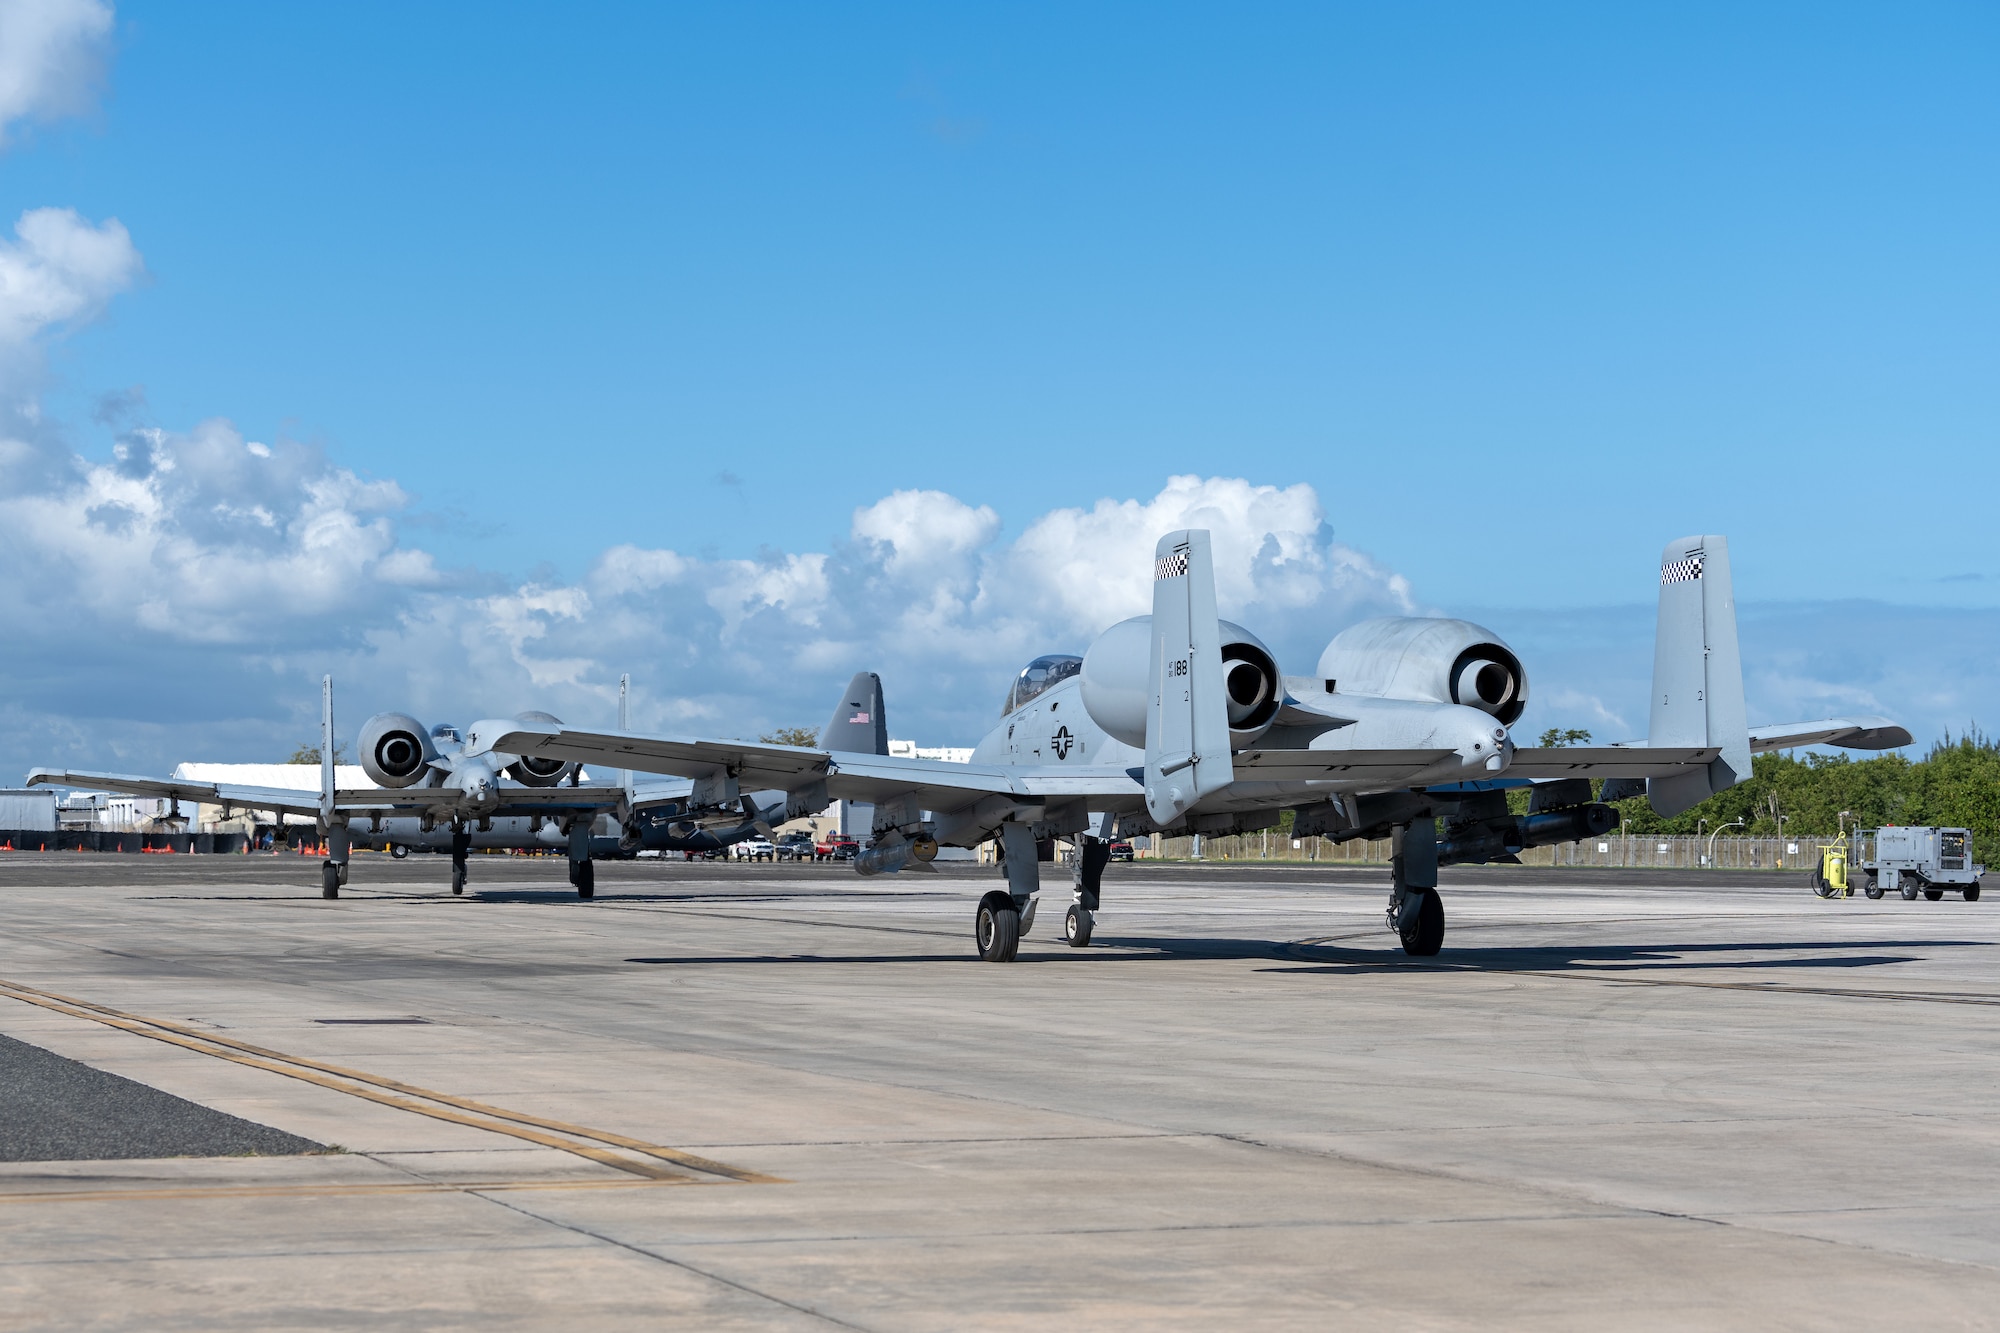 Two U.S. Air Force A-10C Thunderbolt II assigned to the 23rd Air Expeditionary Wing, transit the 156th Wing airfield during the Forward Tiger exercise at Muñiz Air National Guard Base, Carolina, Puerto Rico Feb. 22, 2023. The Puerto Rico Air National Guard provided logistical support, command and control, airfield operations support and hangar space during Operation Forward Tiger, in this exercise, airmen partnered with Dominican Republic, Jamaica and Canadian Forces to enhance the humanitarian assistance and disaster relief mission throughout the Caribbean.  (U.S. Air National Guard photo by Airman 1st Class Gisselle Toro)